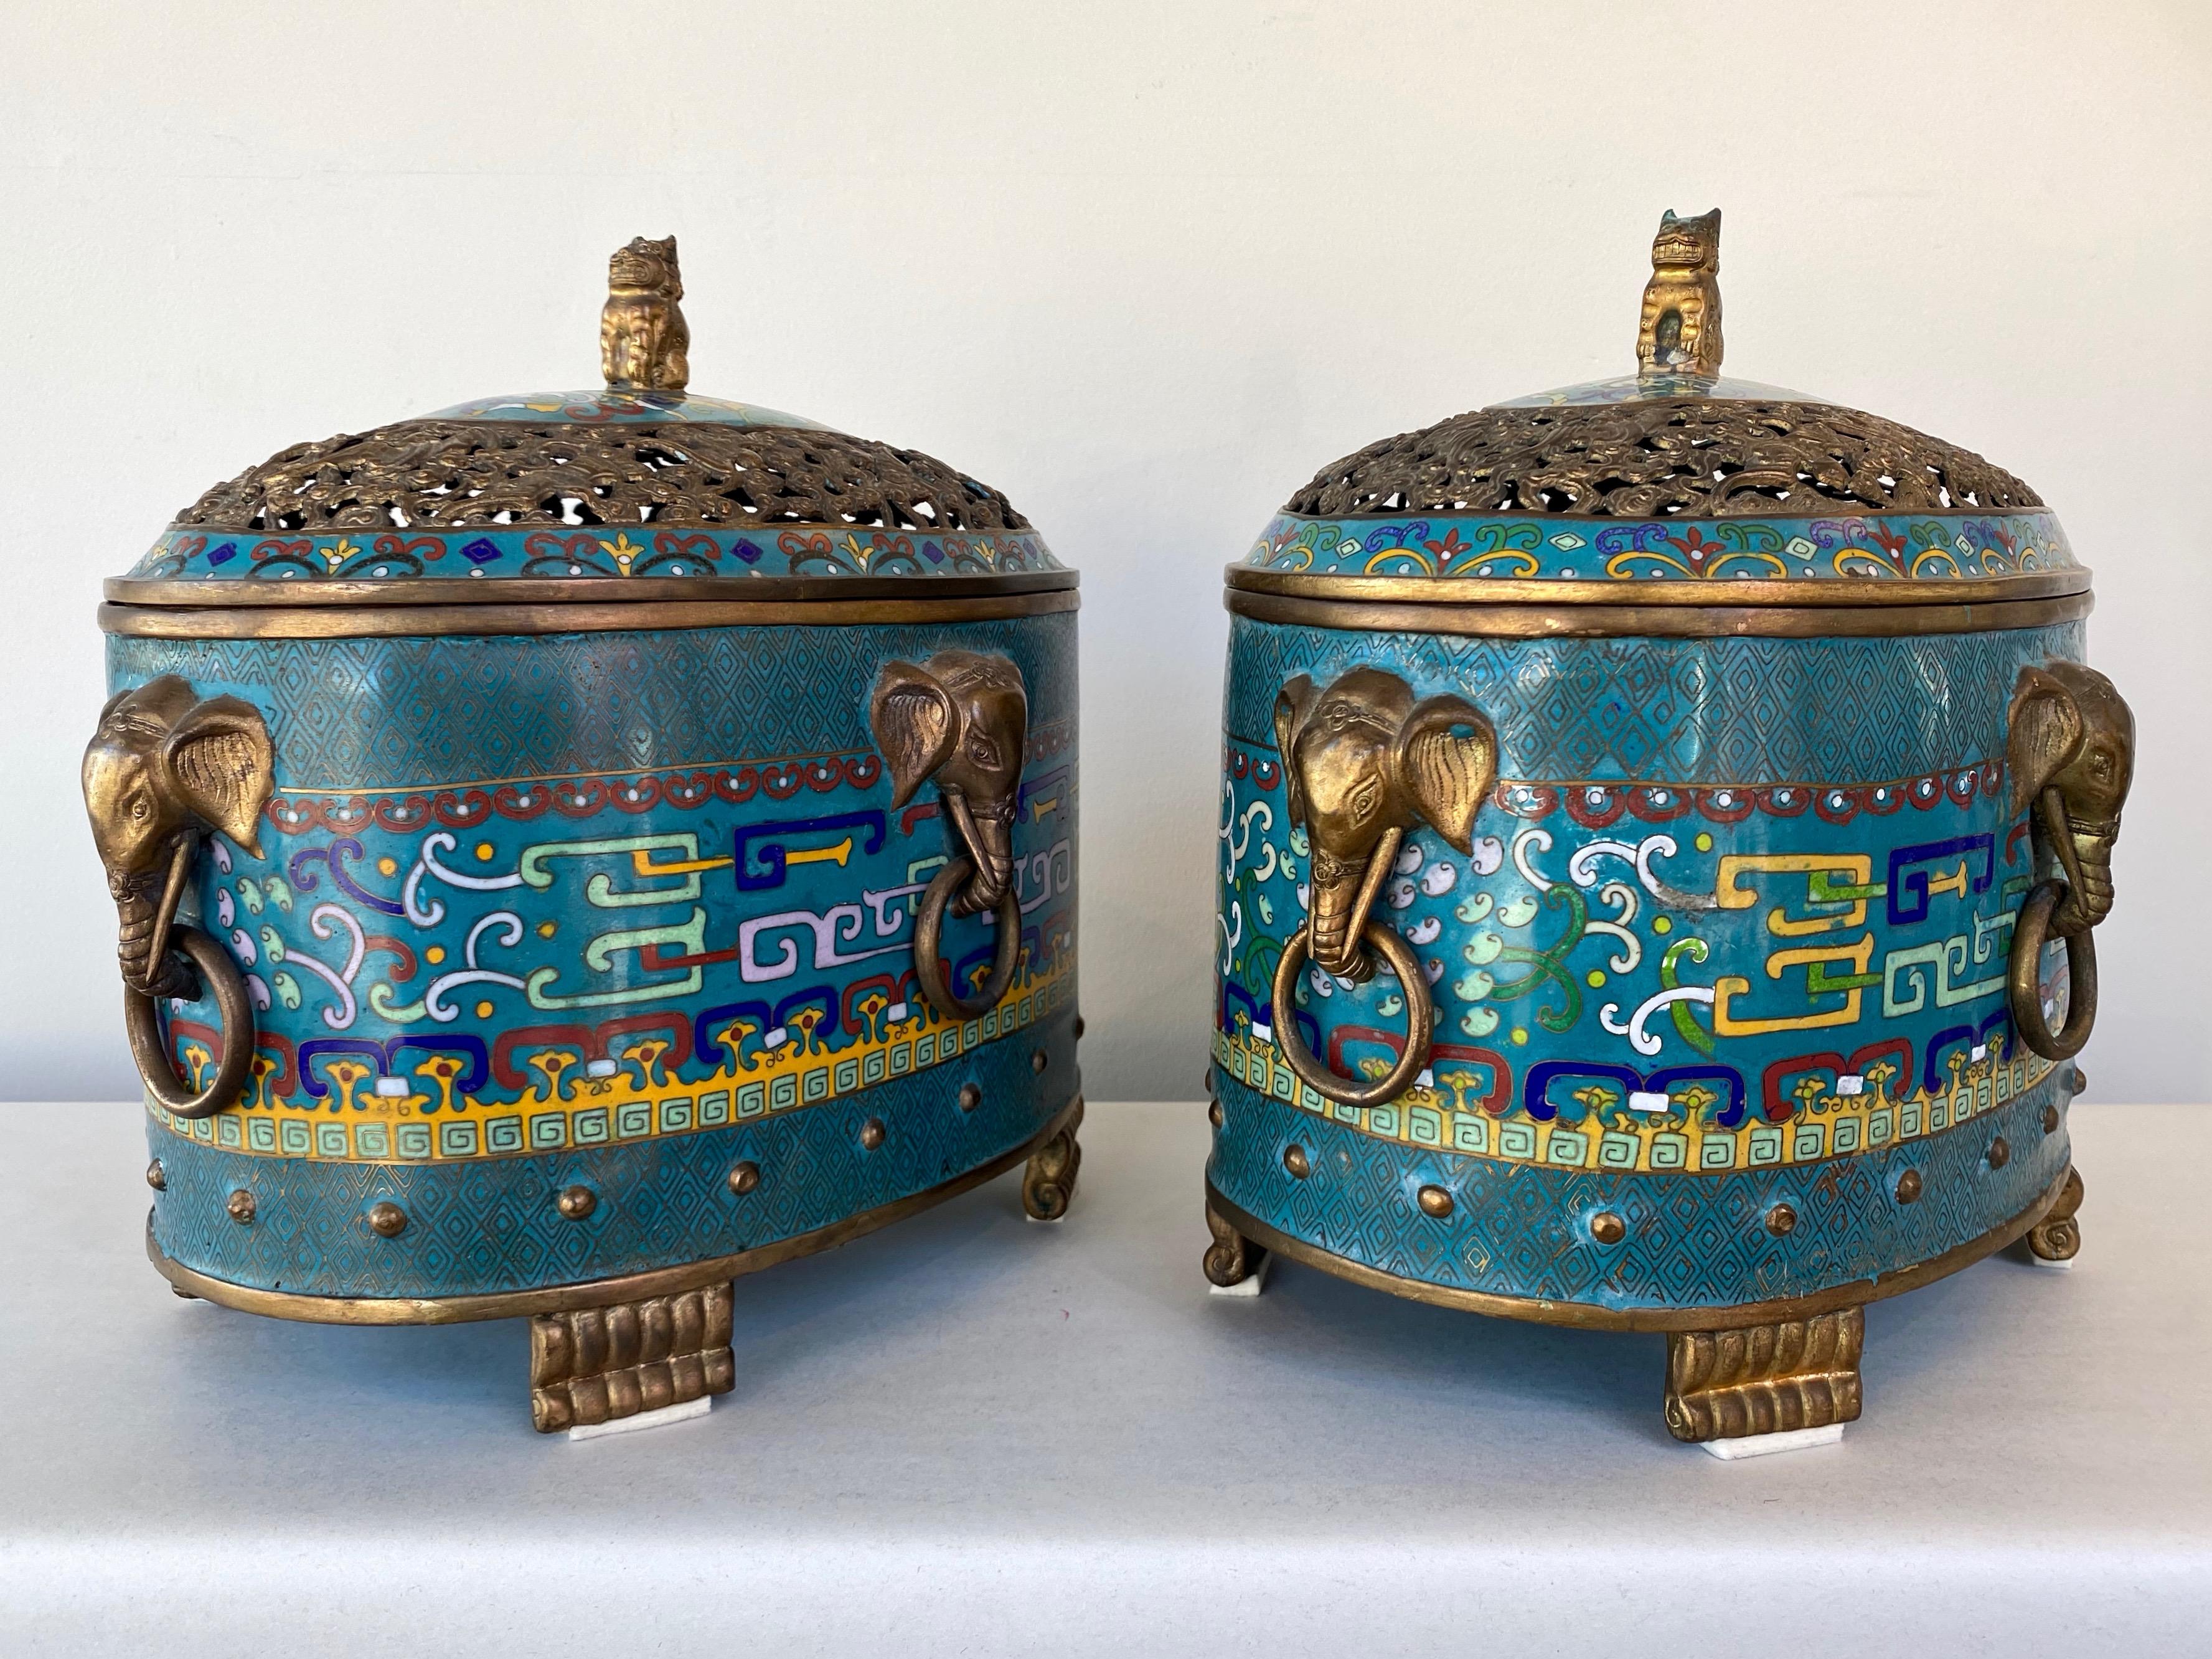 A pair of large and uncommon 1960s Chinese cloisonné & brass oval shaped censers with elephant head handles and foo dog-topped pierced lids.

Detailed, colorful, and well-executed cloisonné decoration with finely wrought brass line work and